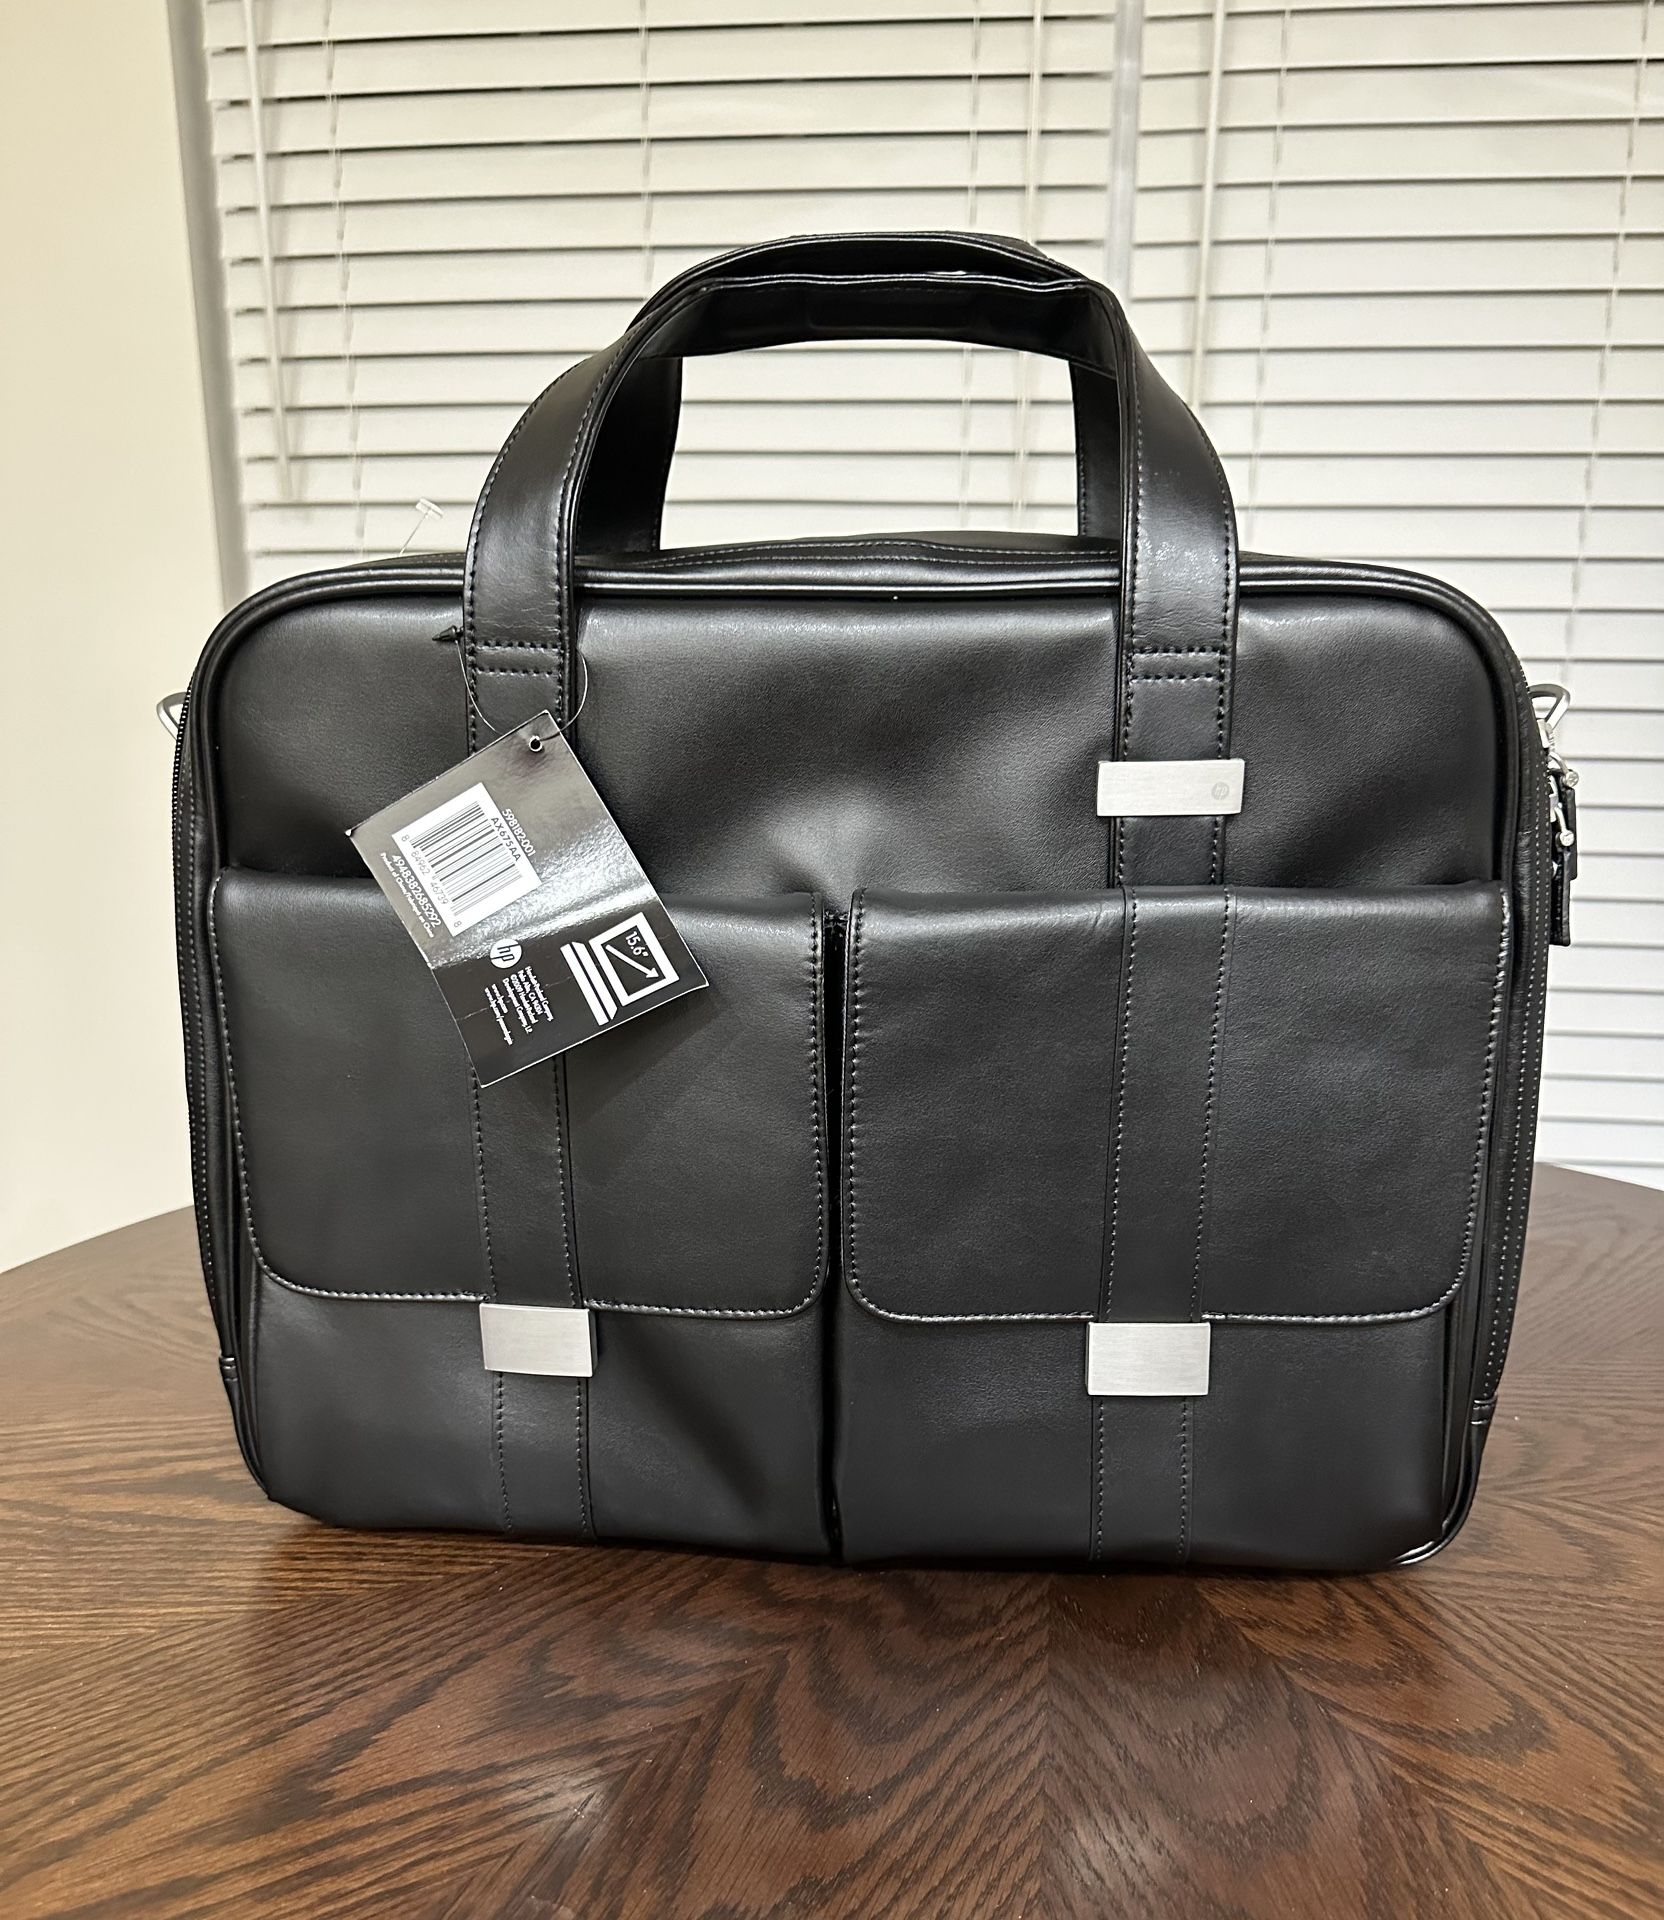 HP Executive Carrying Case for 15.6" Notebook - Black - Leather  Mfr # 1LG83AA